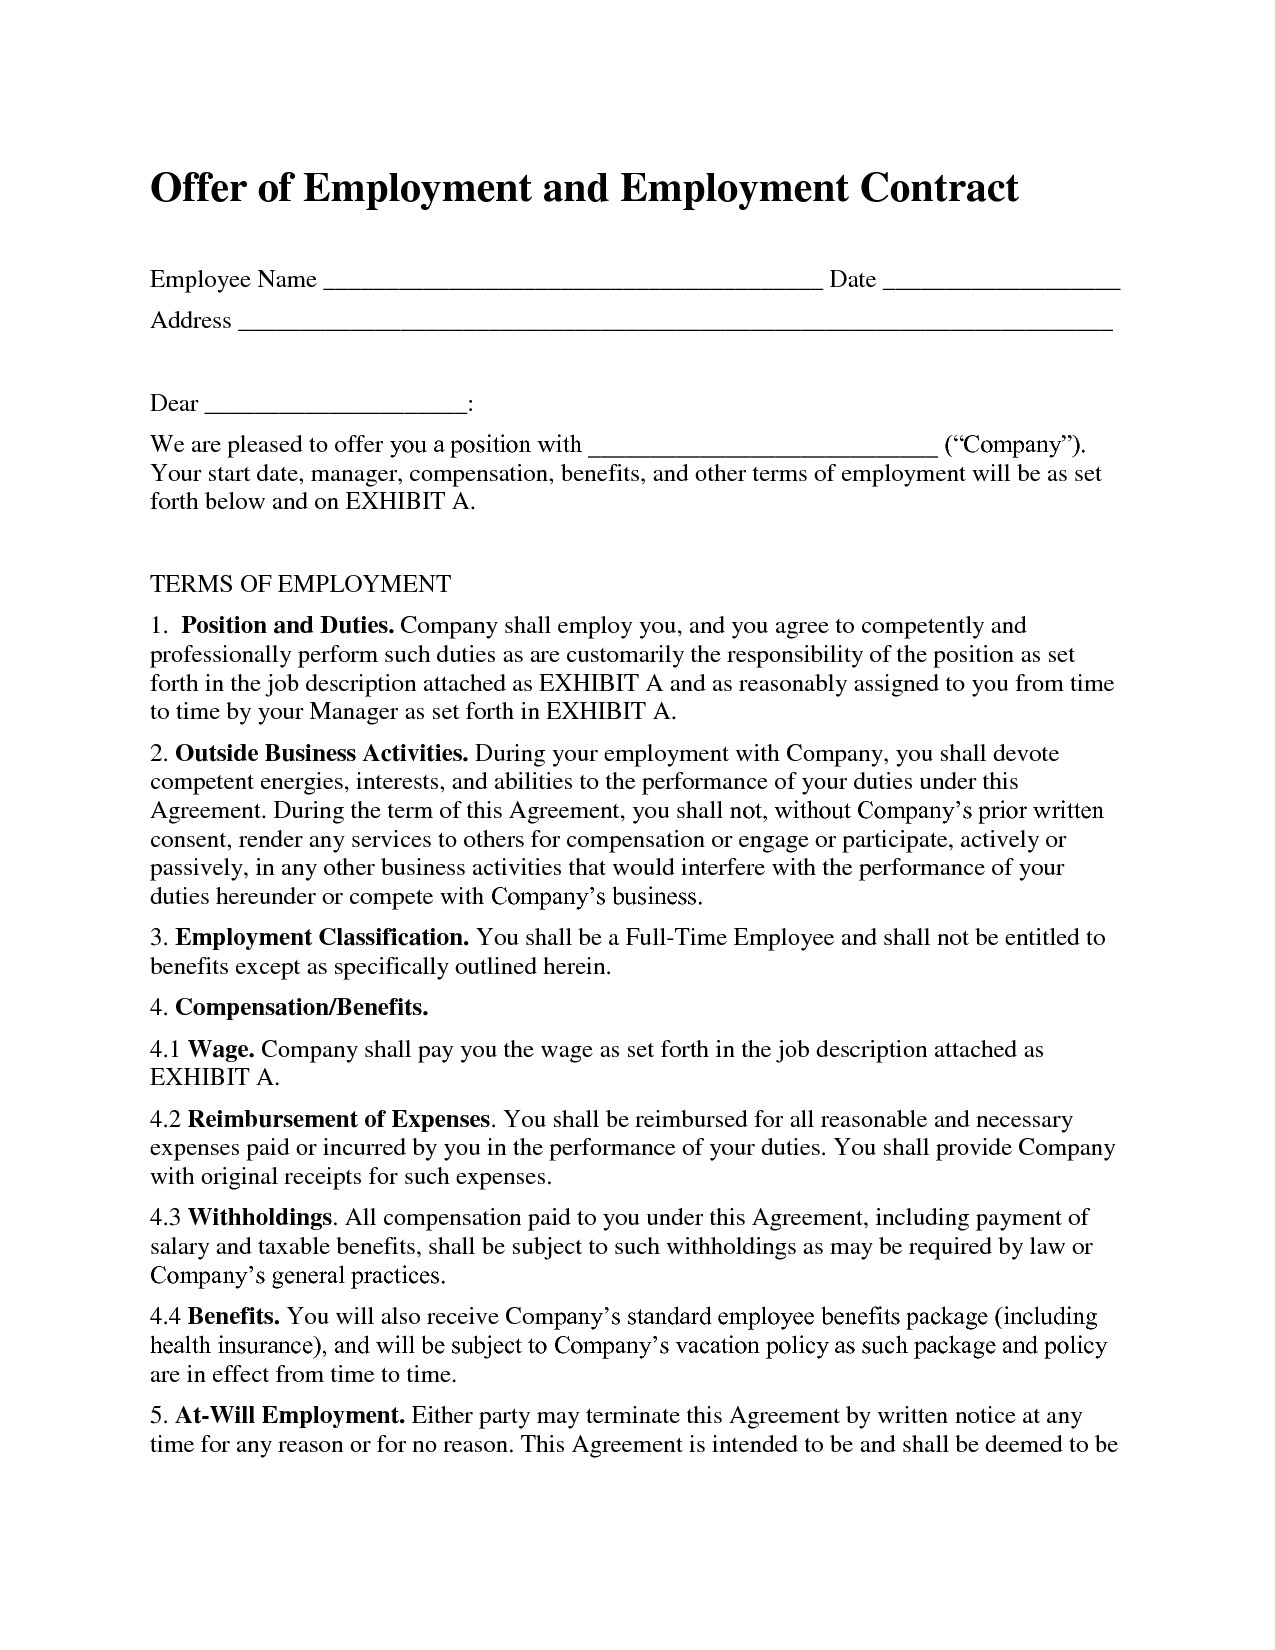 employment contract sample